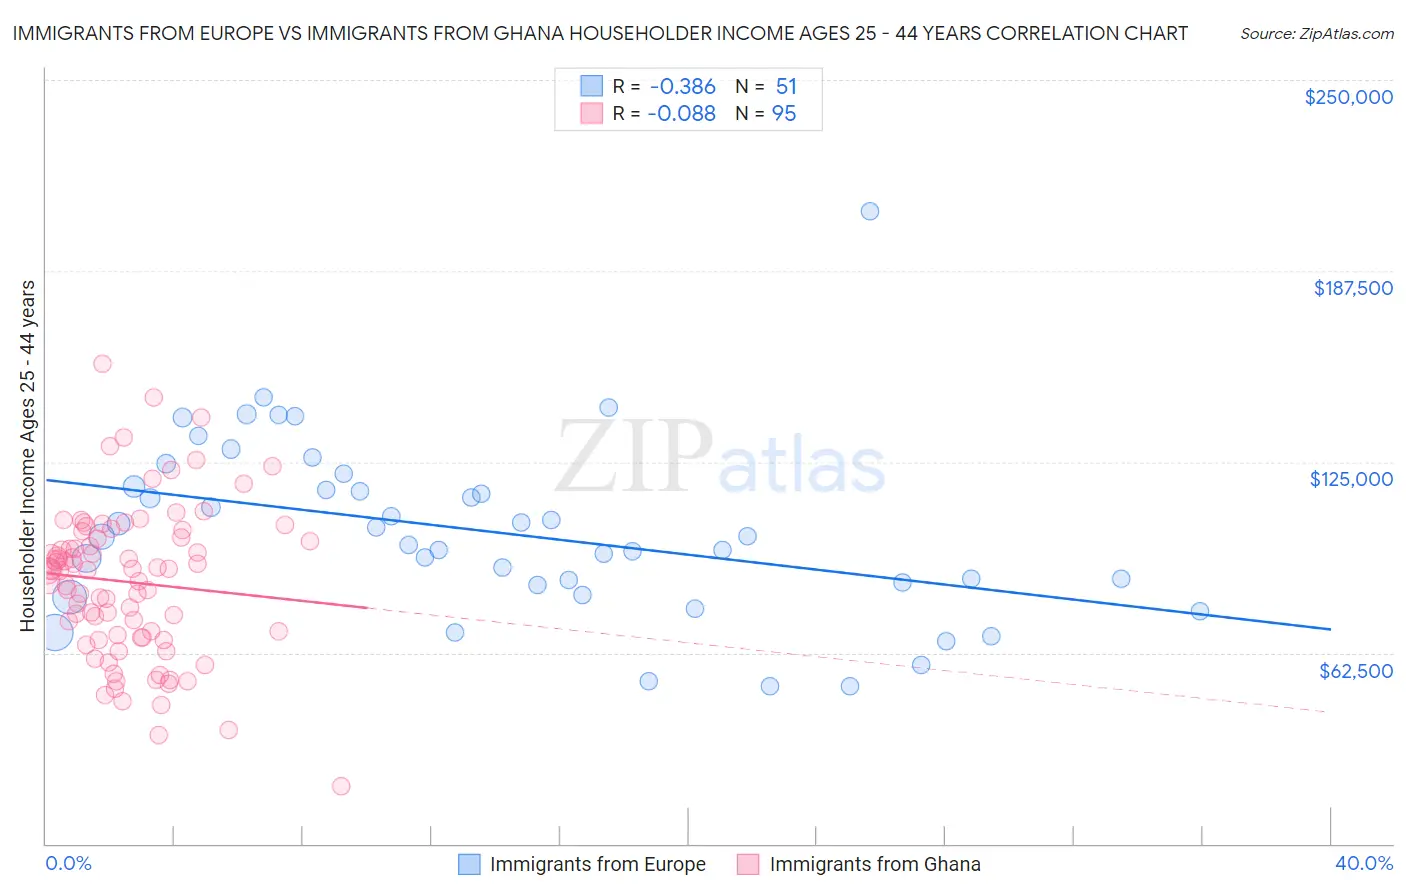 Immigrants from Europe vs Immigrants from Ghana Householder Income Ages 25 - 44 years